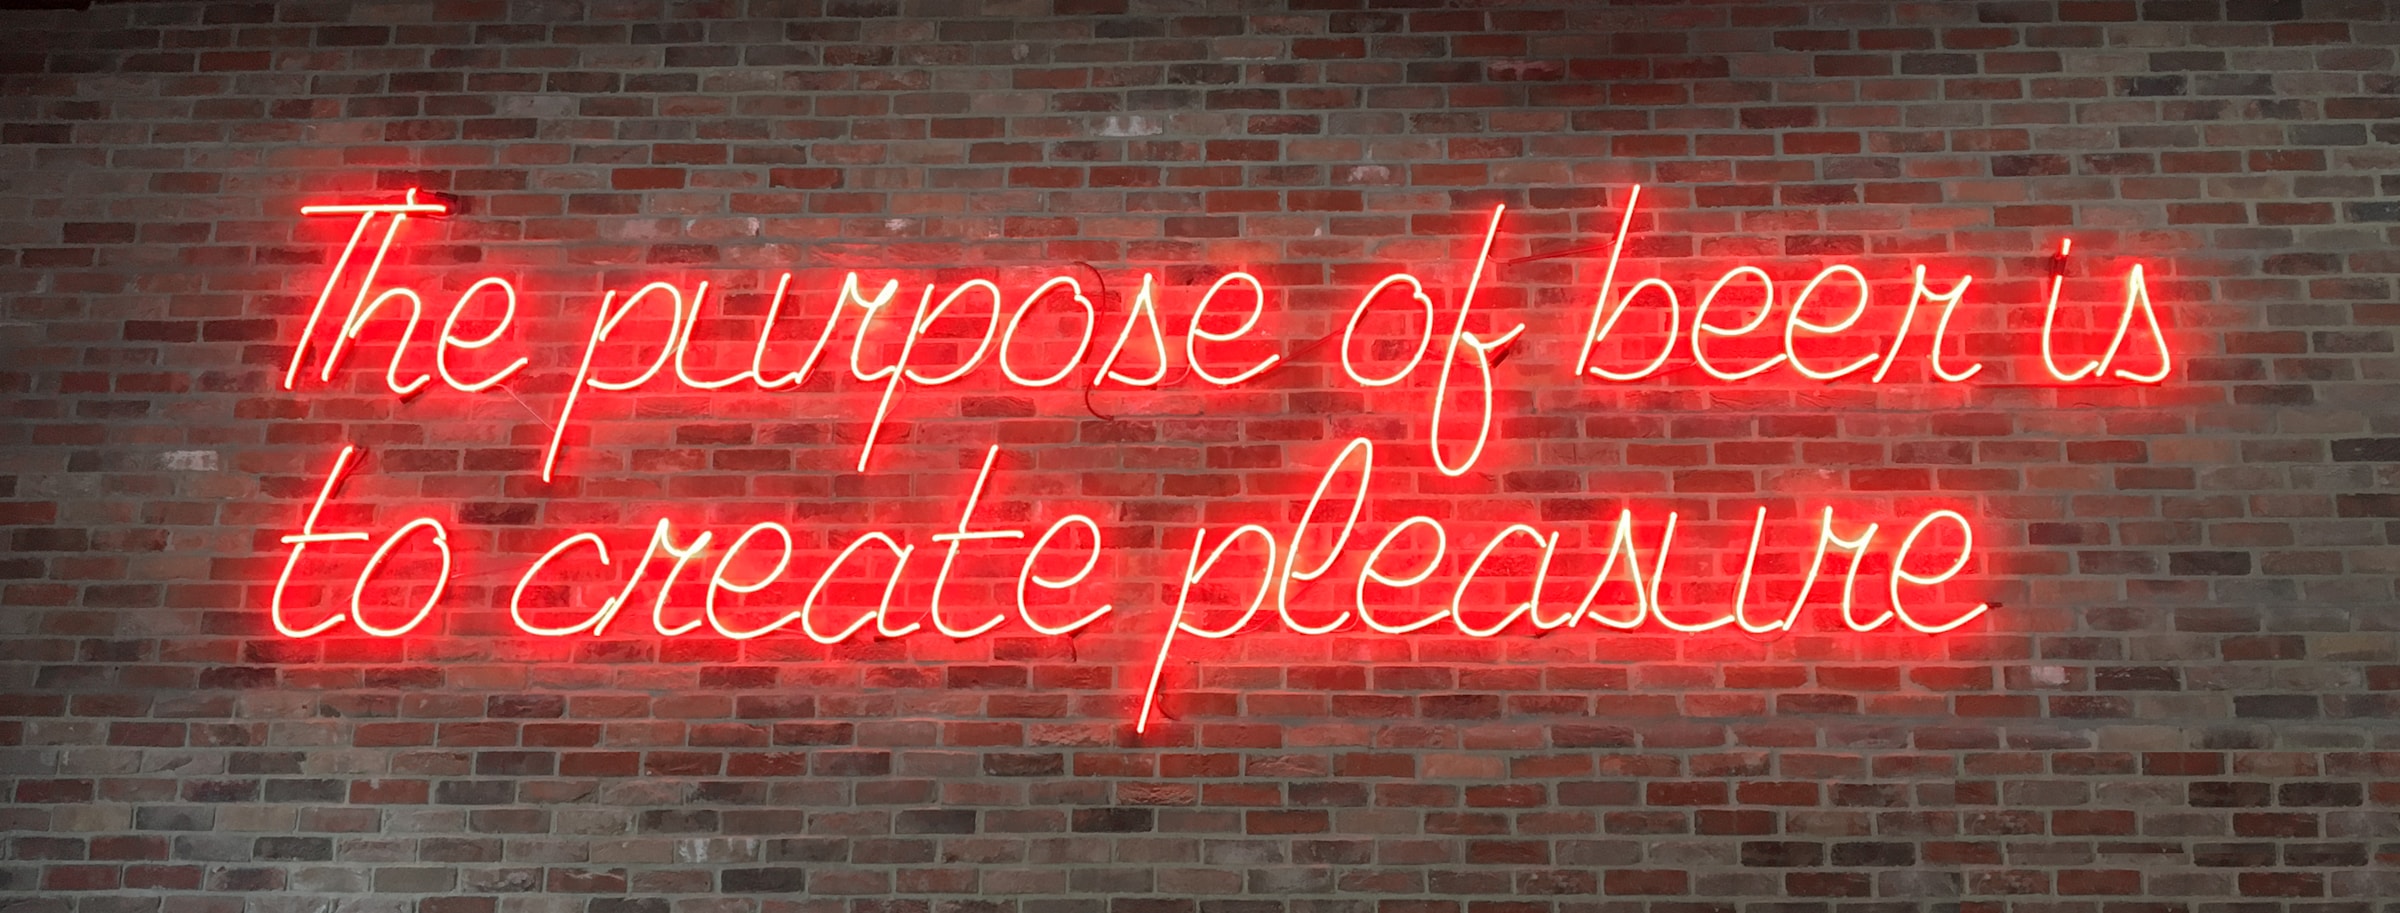 What is a workplace culture of purpose? And even if you already have an awesome company culture, is a sense of purpose part of that?